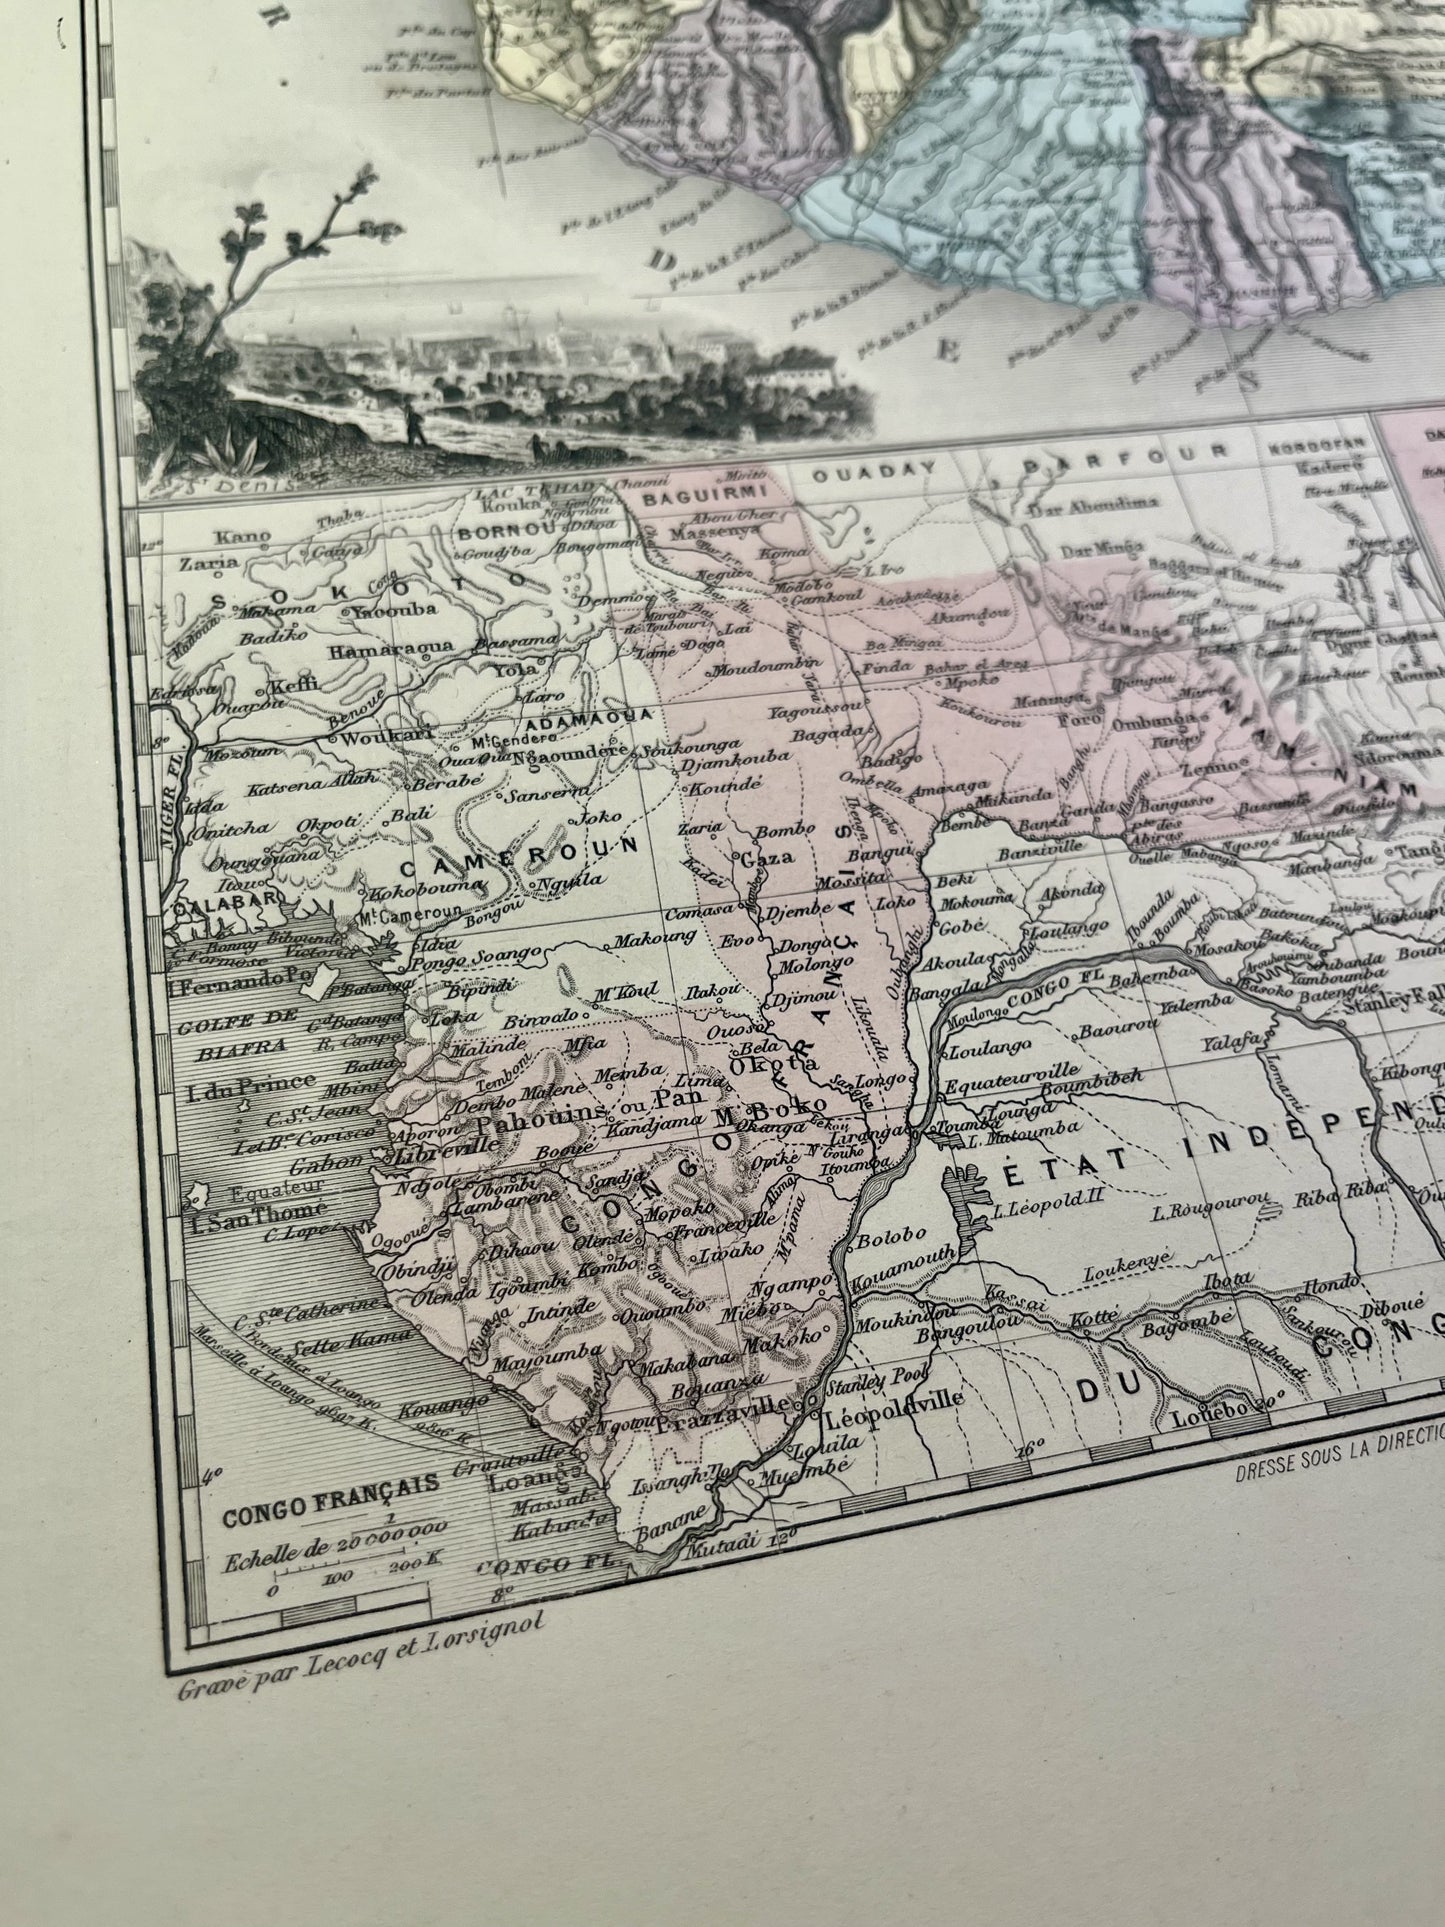 Old map of Réunion by A. Vuillemin